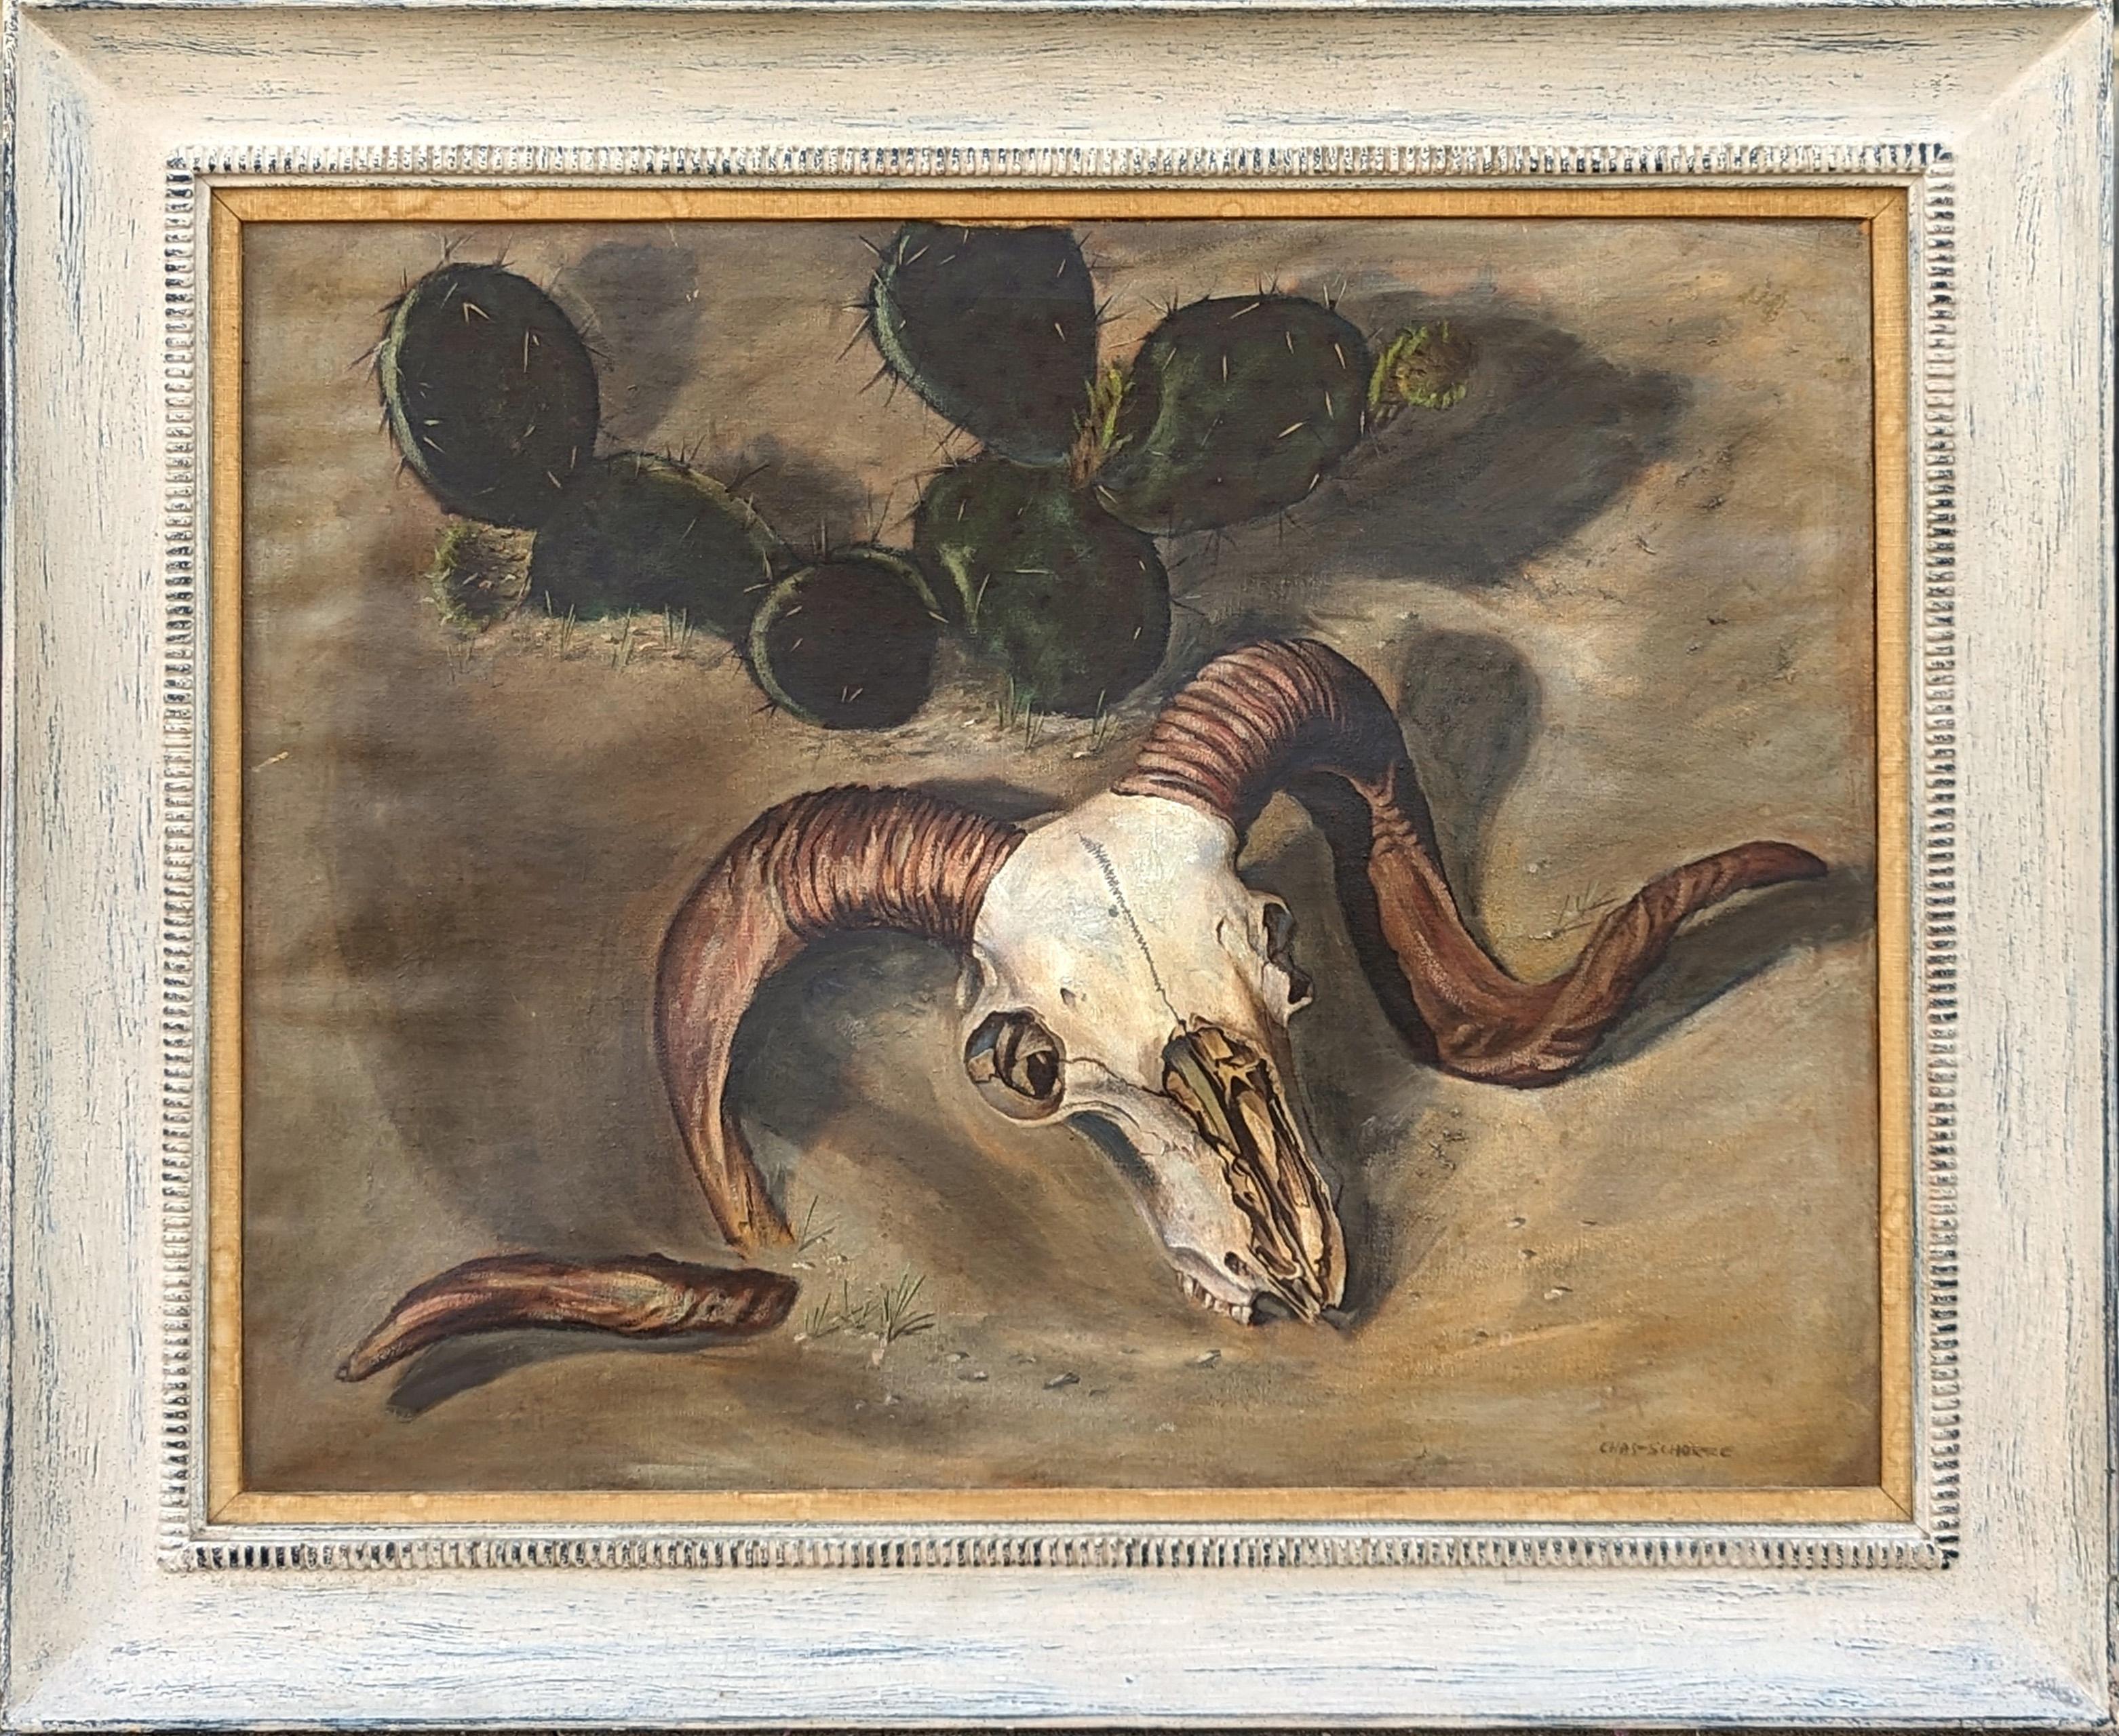 Charles Schorre Animal Painting - Modern Naturalistic Ram Skull and Cactus Western Desert Landscape Painting 